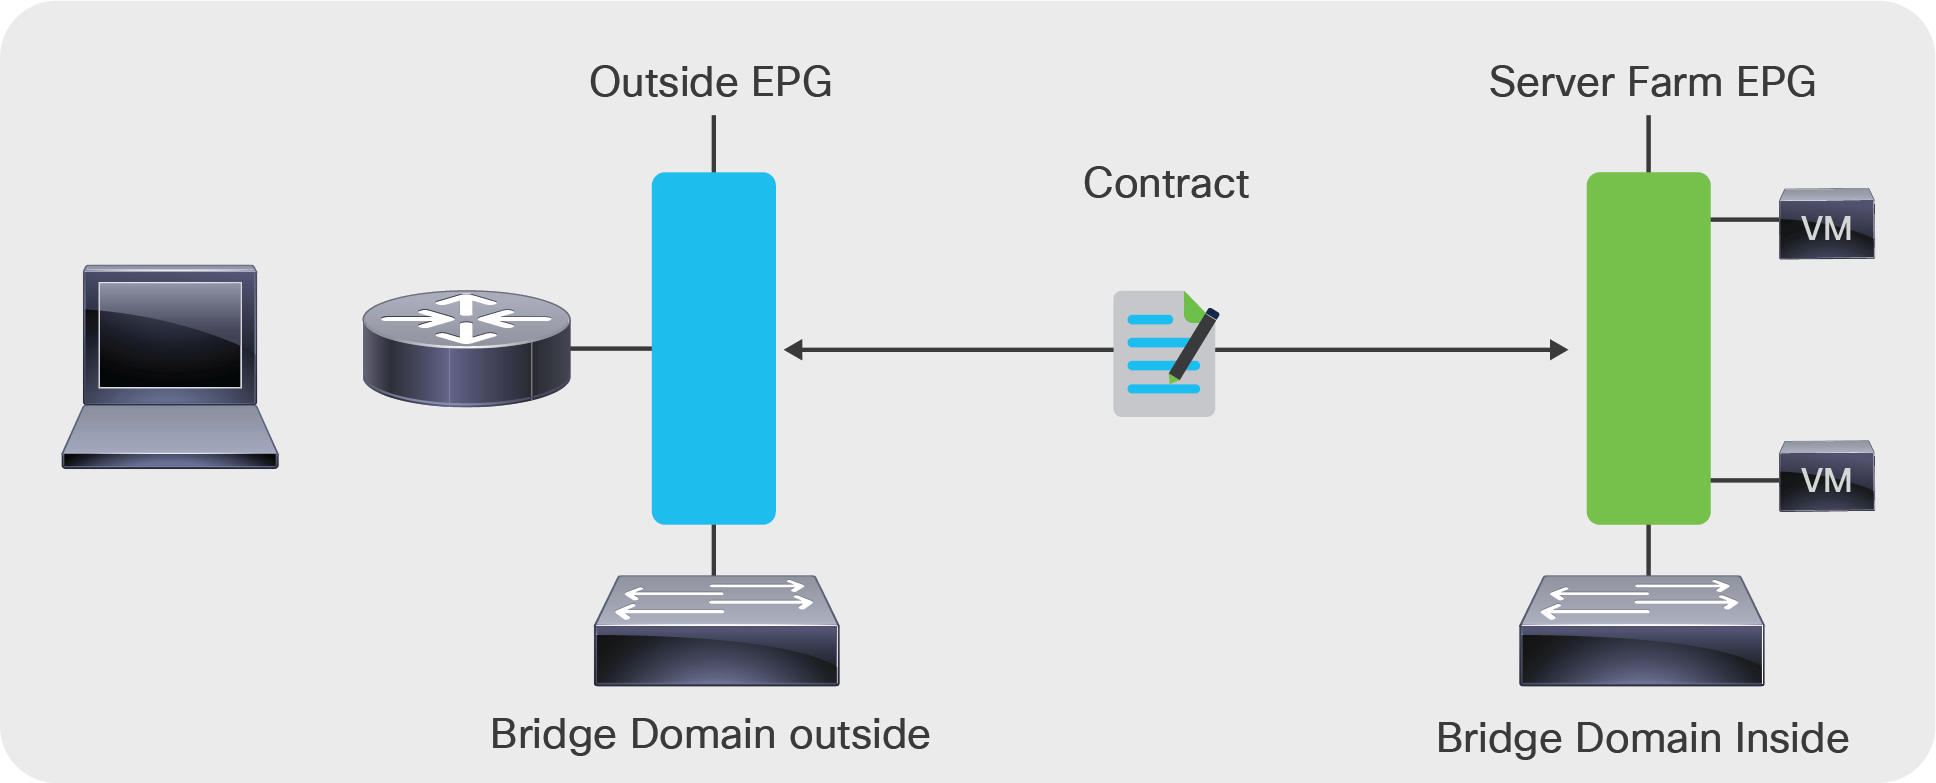 The service graph is inserted between bridge domains by associating it with EPGs